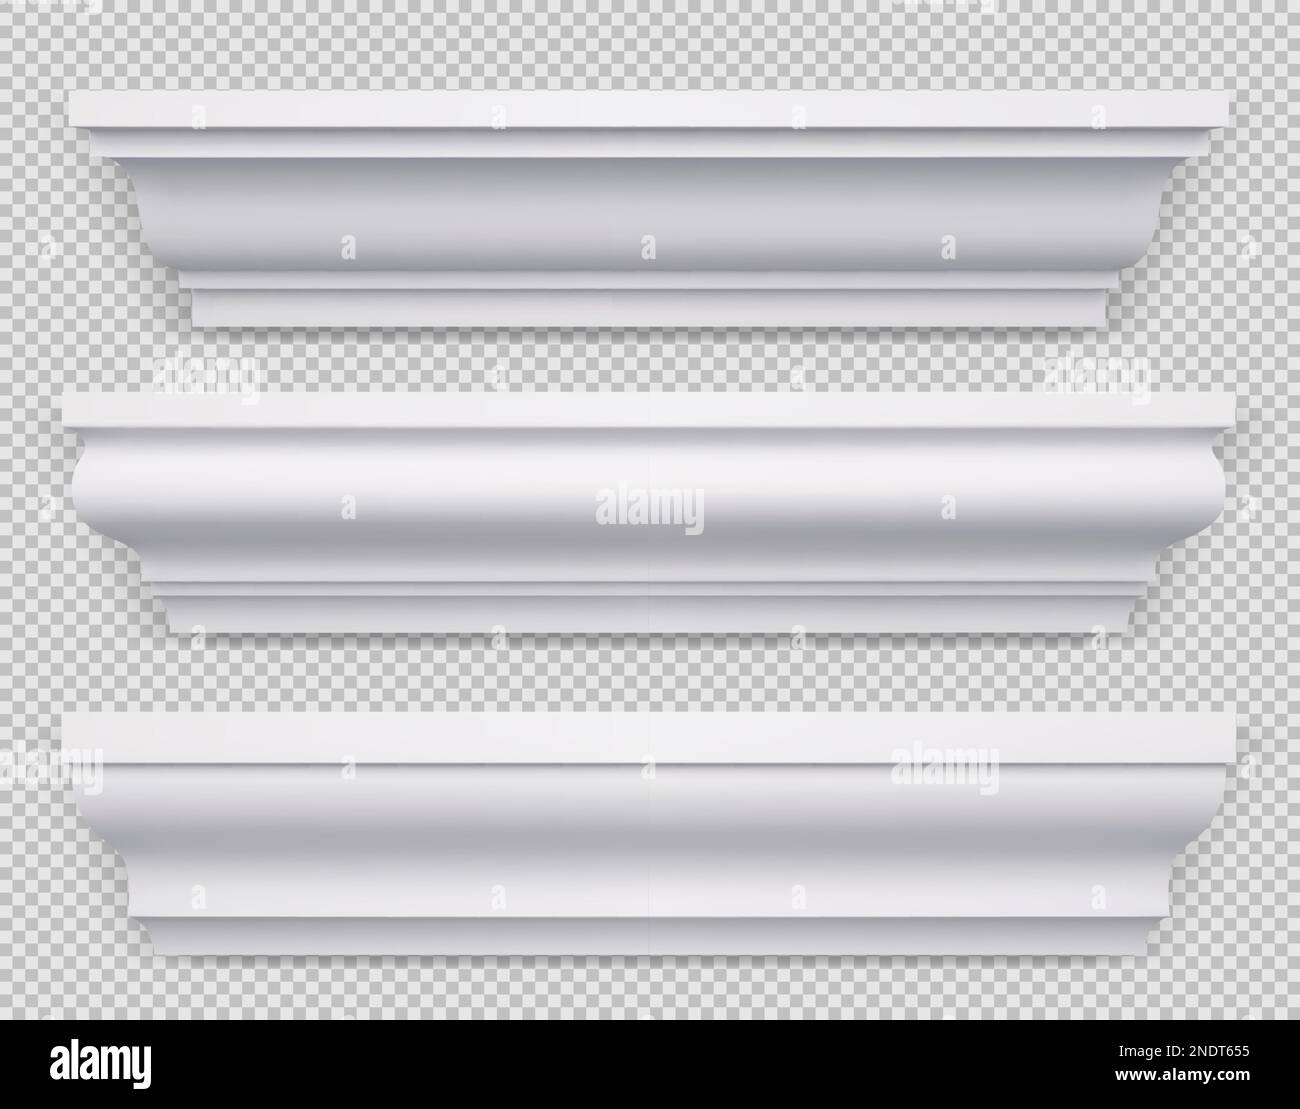 Realistic set of classic white baseboard molding png isolated on transparent background. Vector illustration of decorative skirting boards made of wood or gypsum for ceiling, floor and wall design Stock Vector